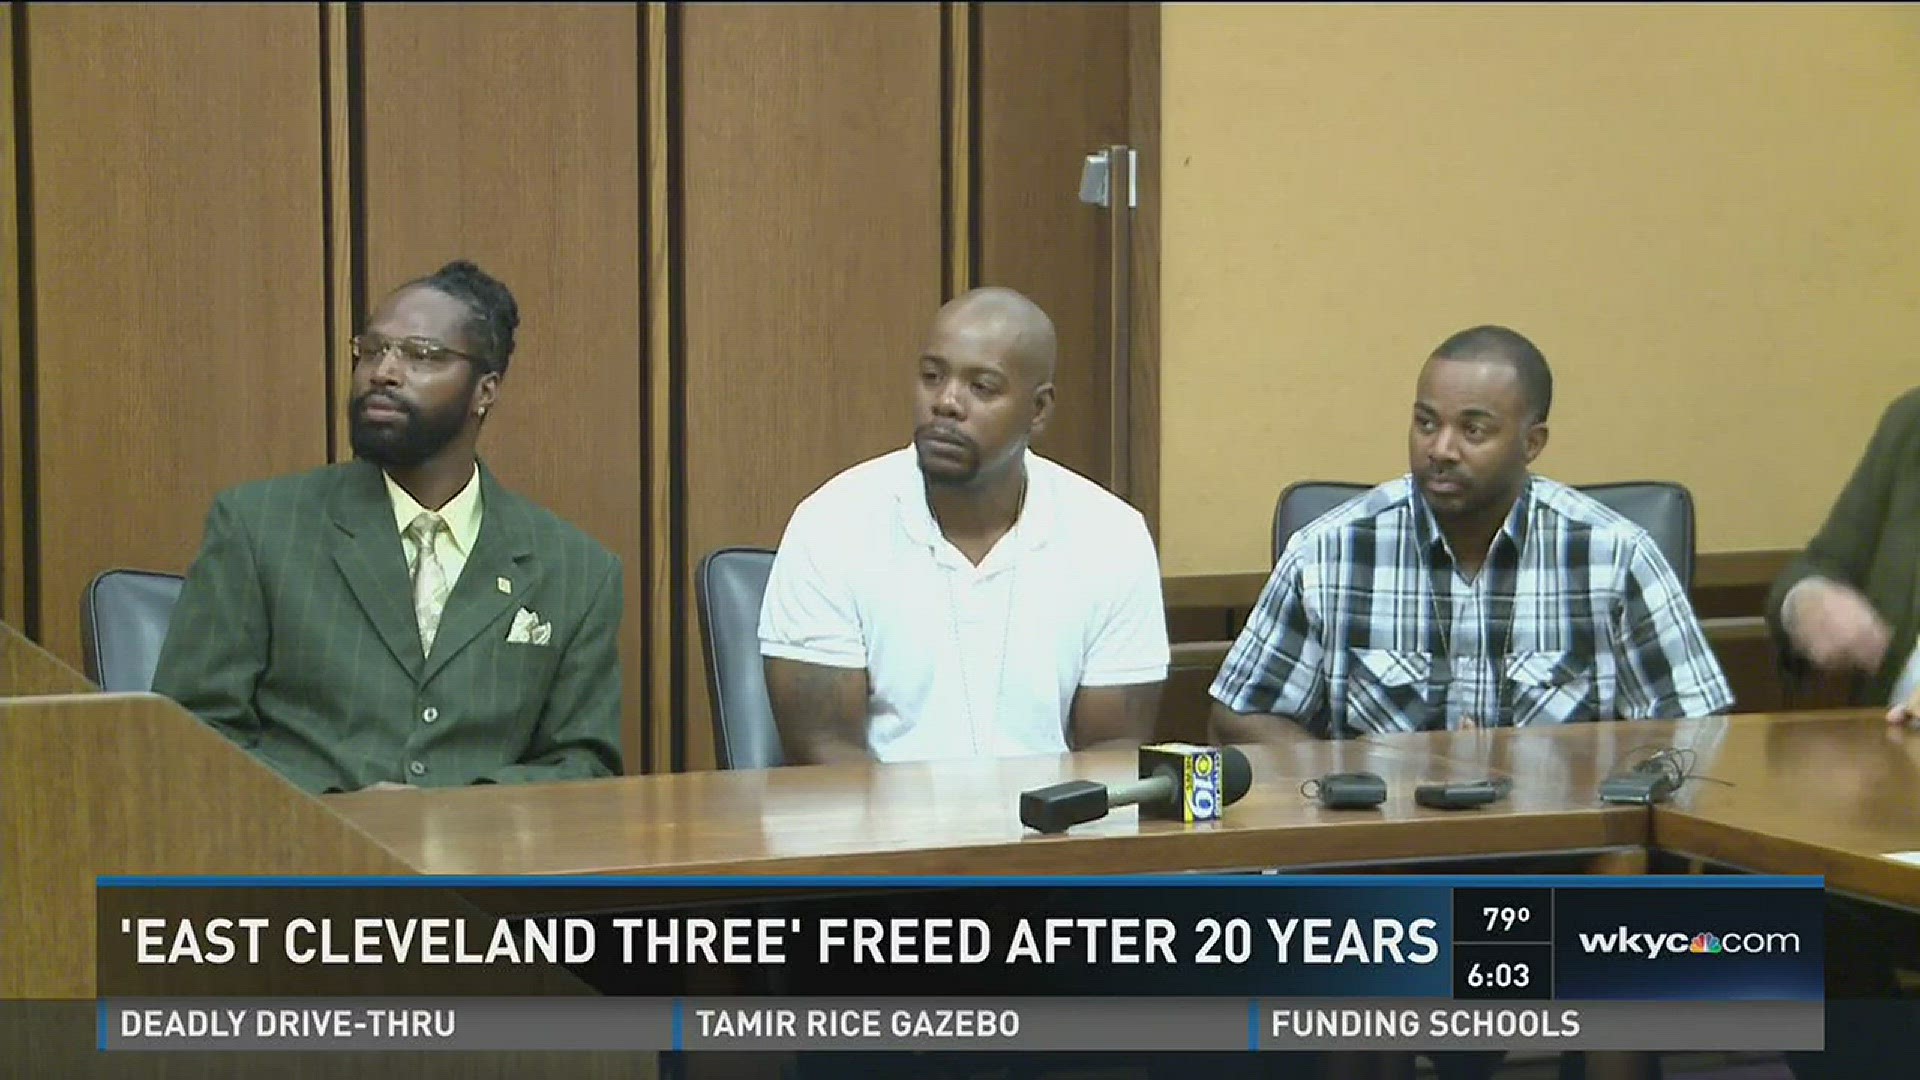 'East Cleveland Three' freed after 20 years